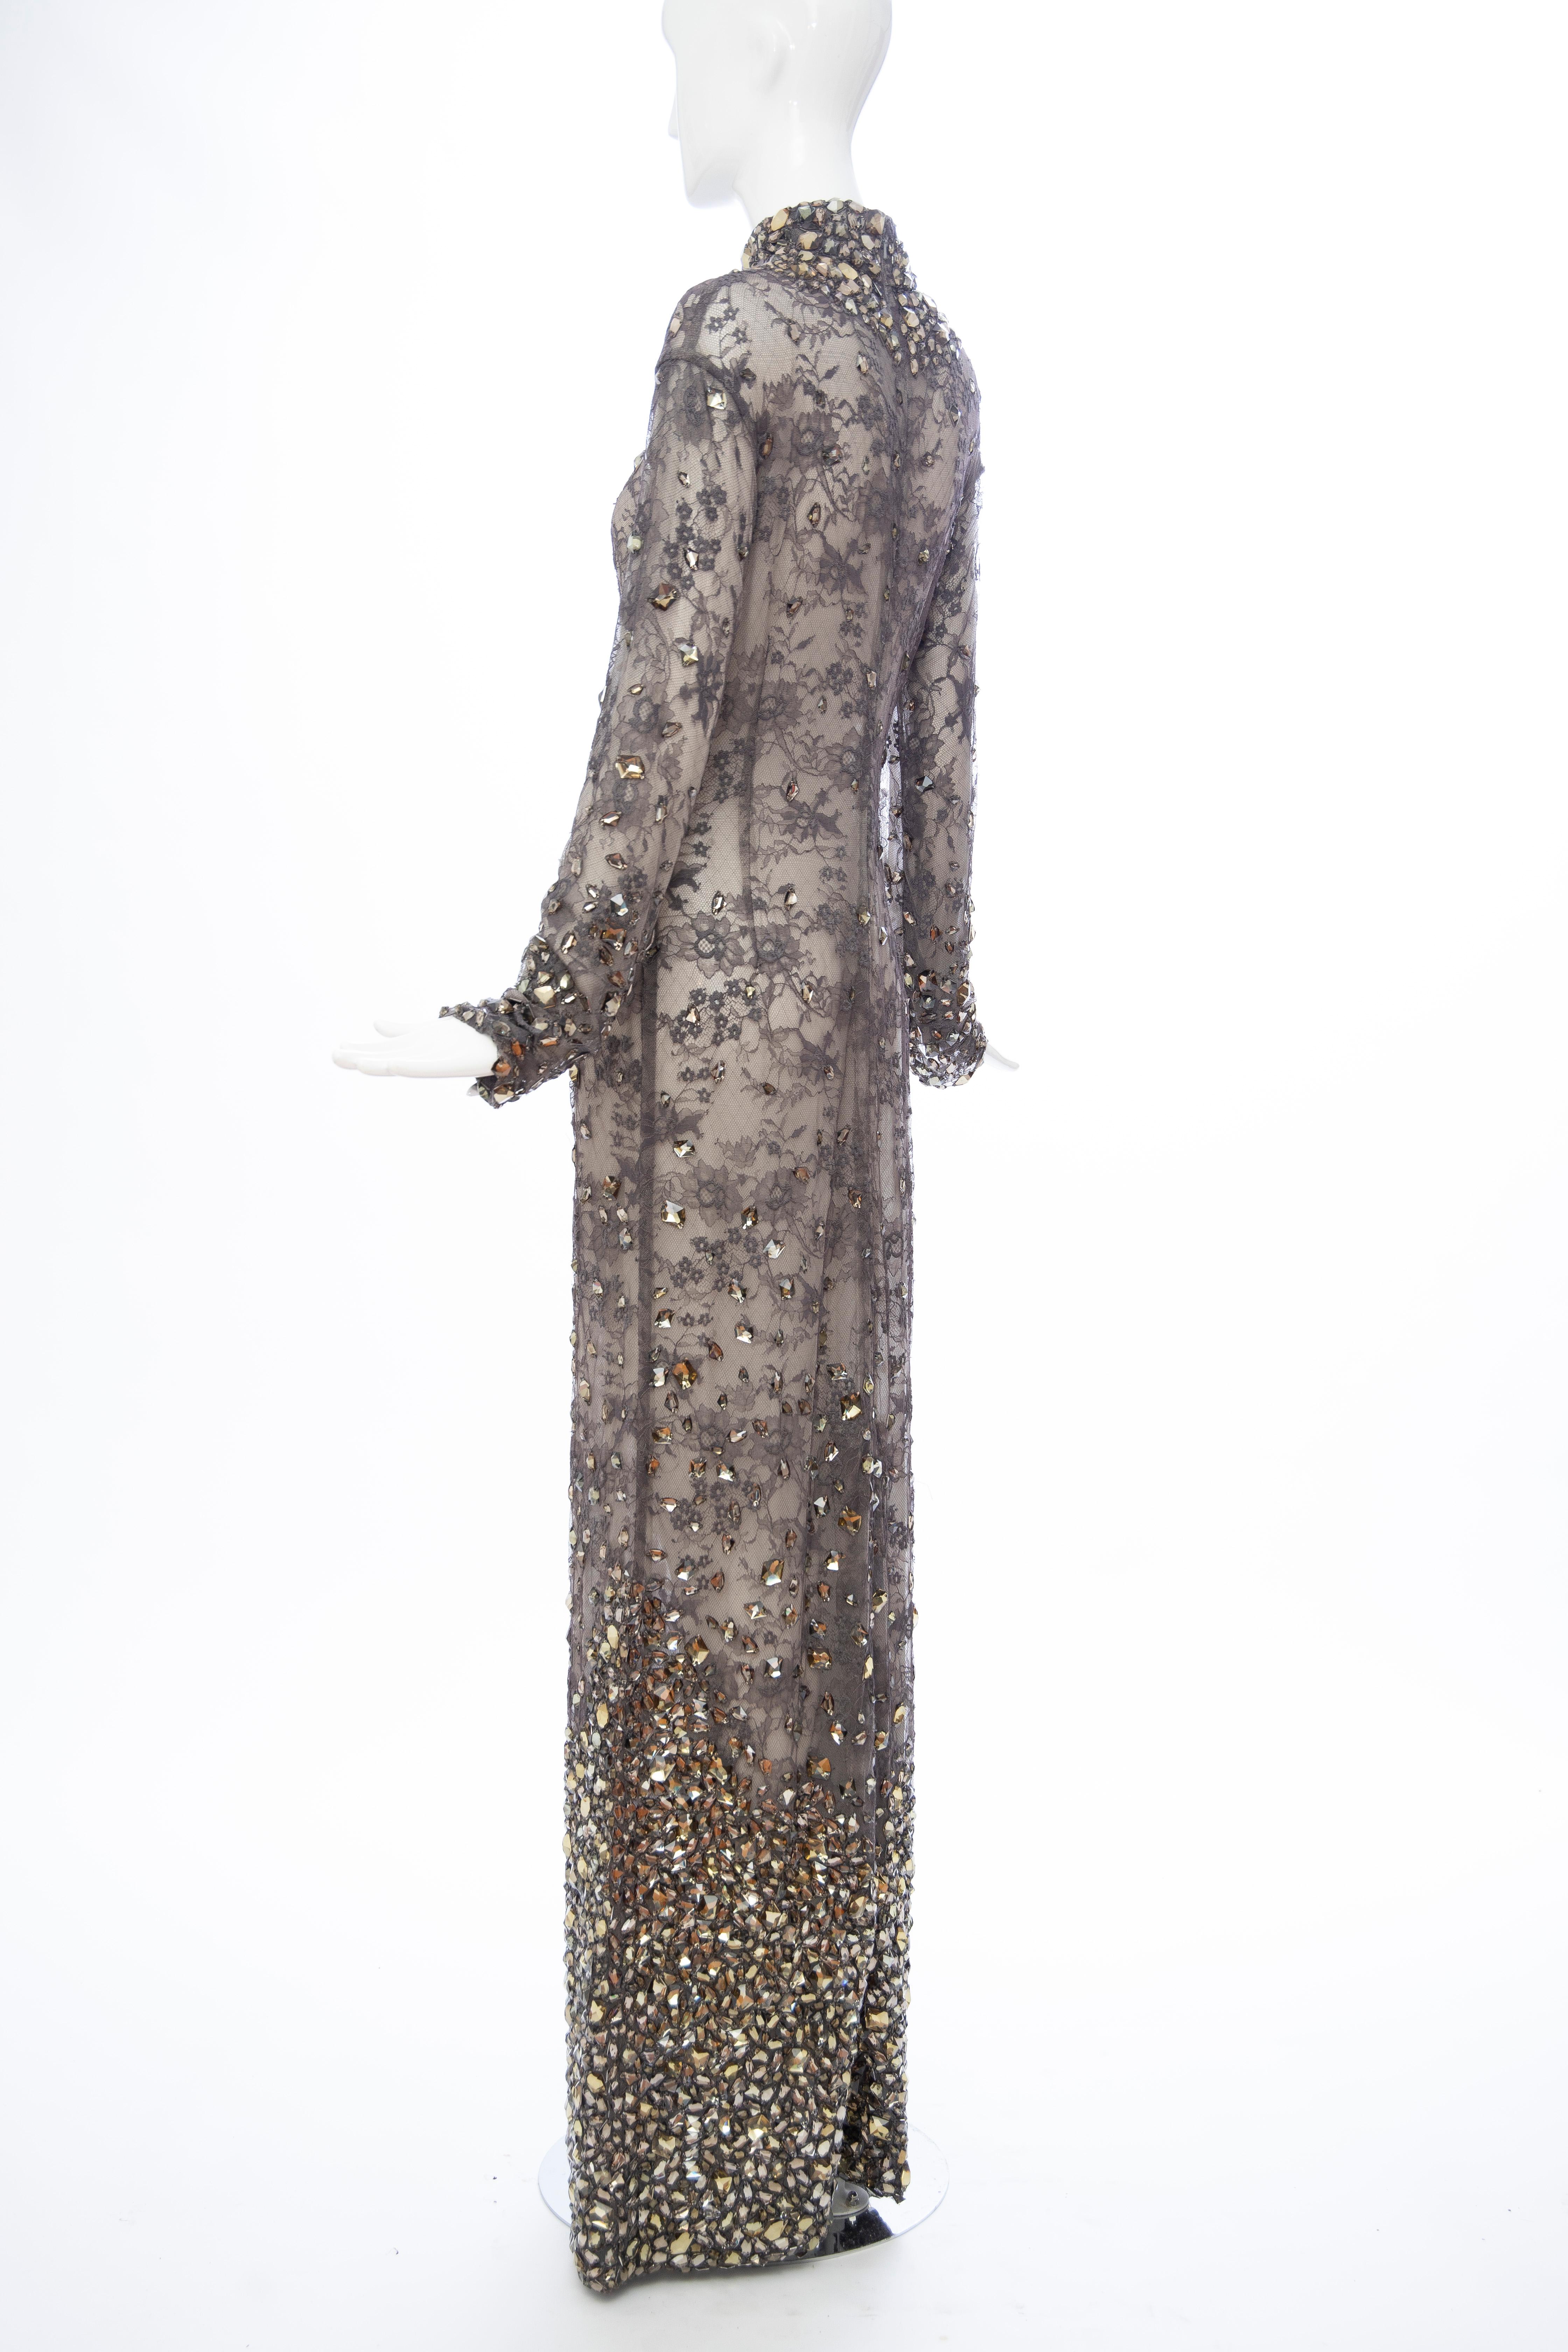 Tom Ford Runway Smokey Grey Lace Appliquéd Faceted Gems Evening Dress, Fall 2011 For Sale 2